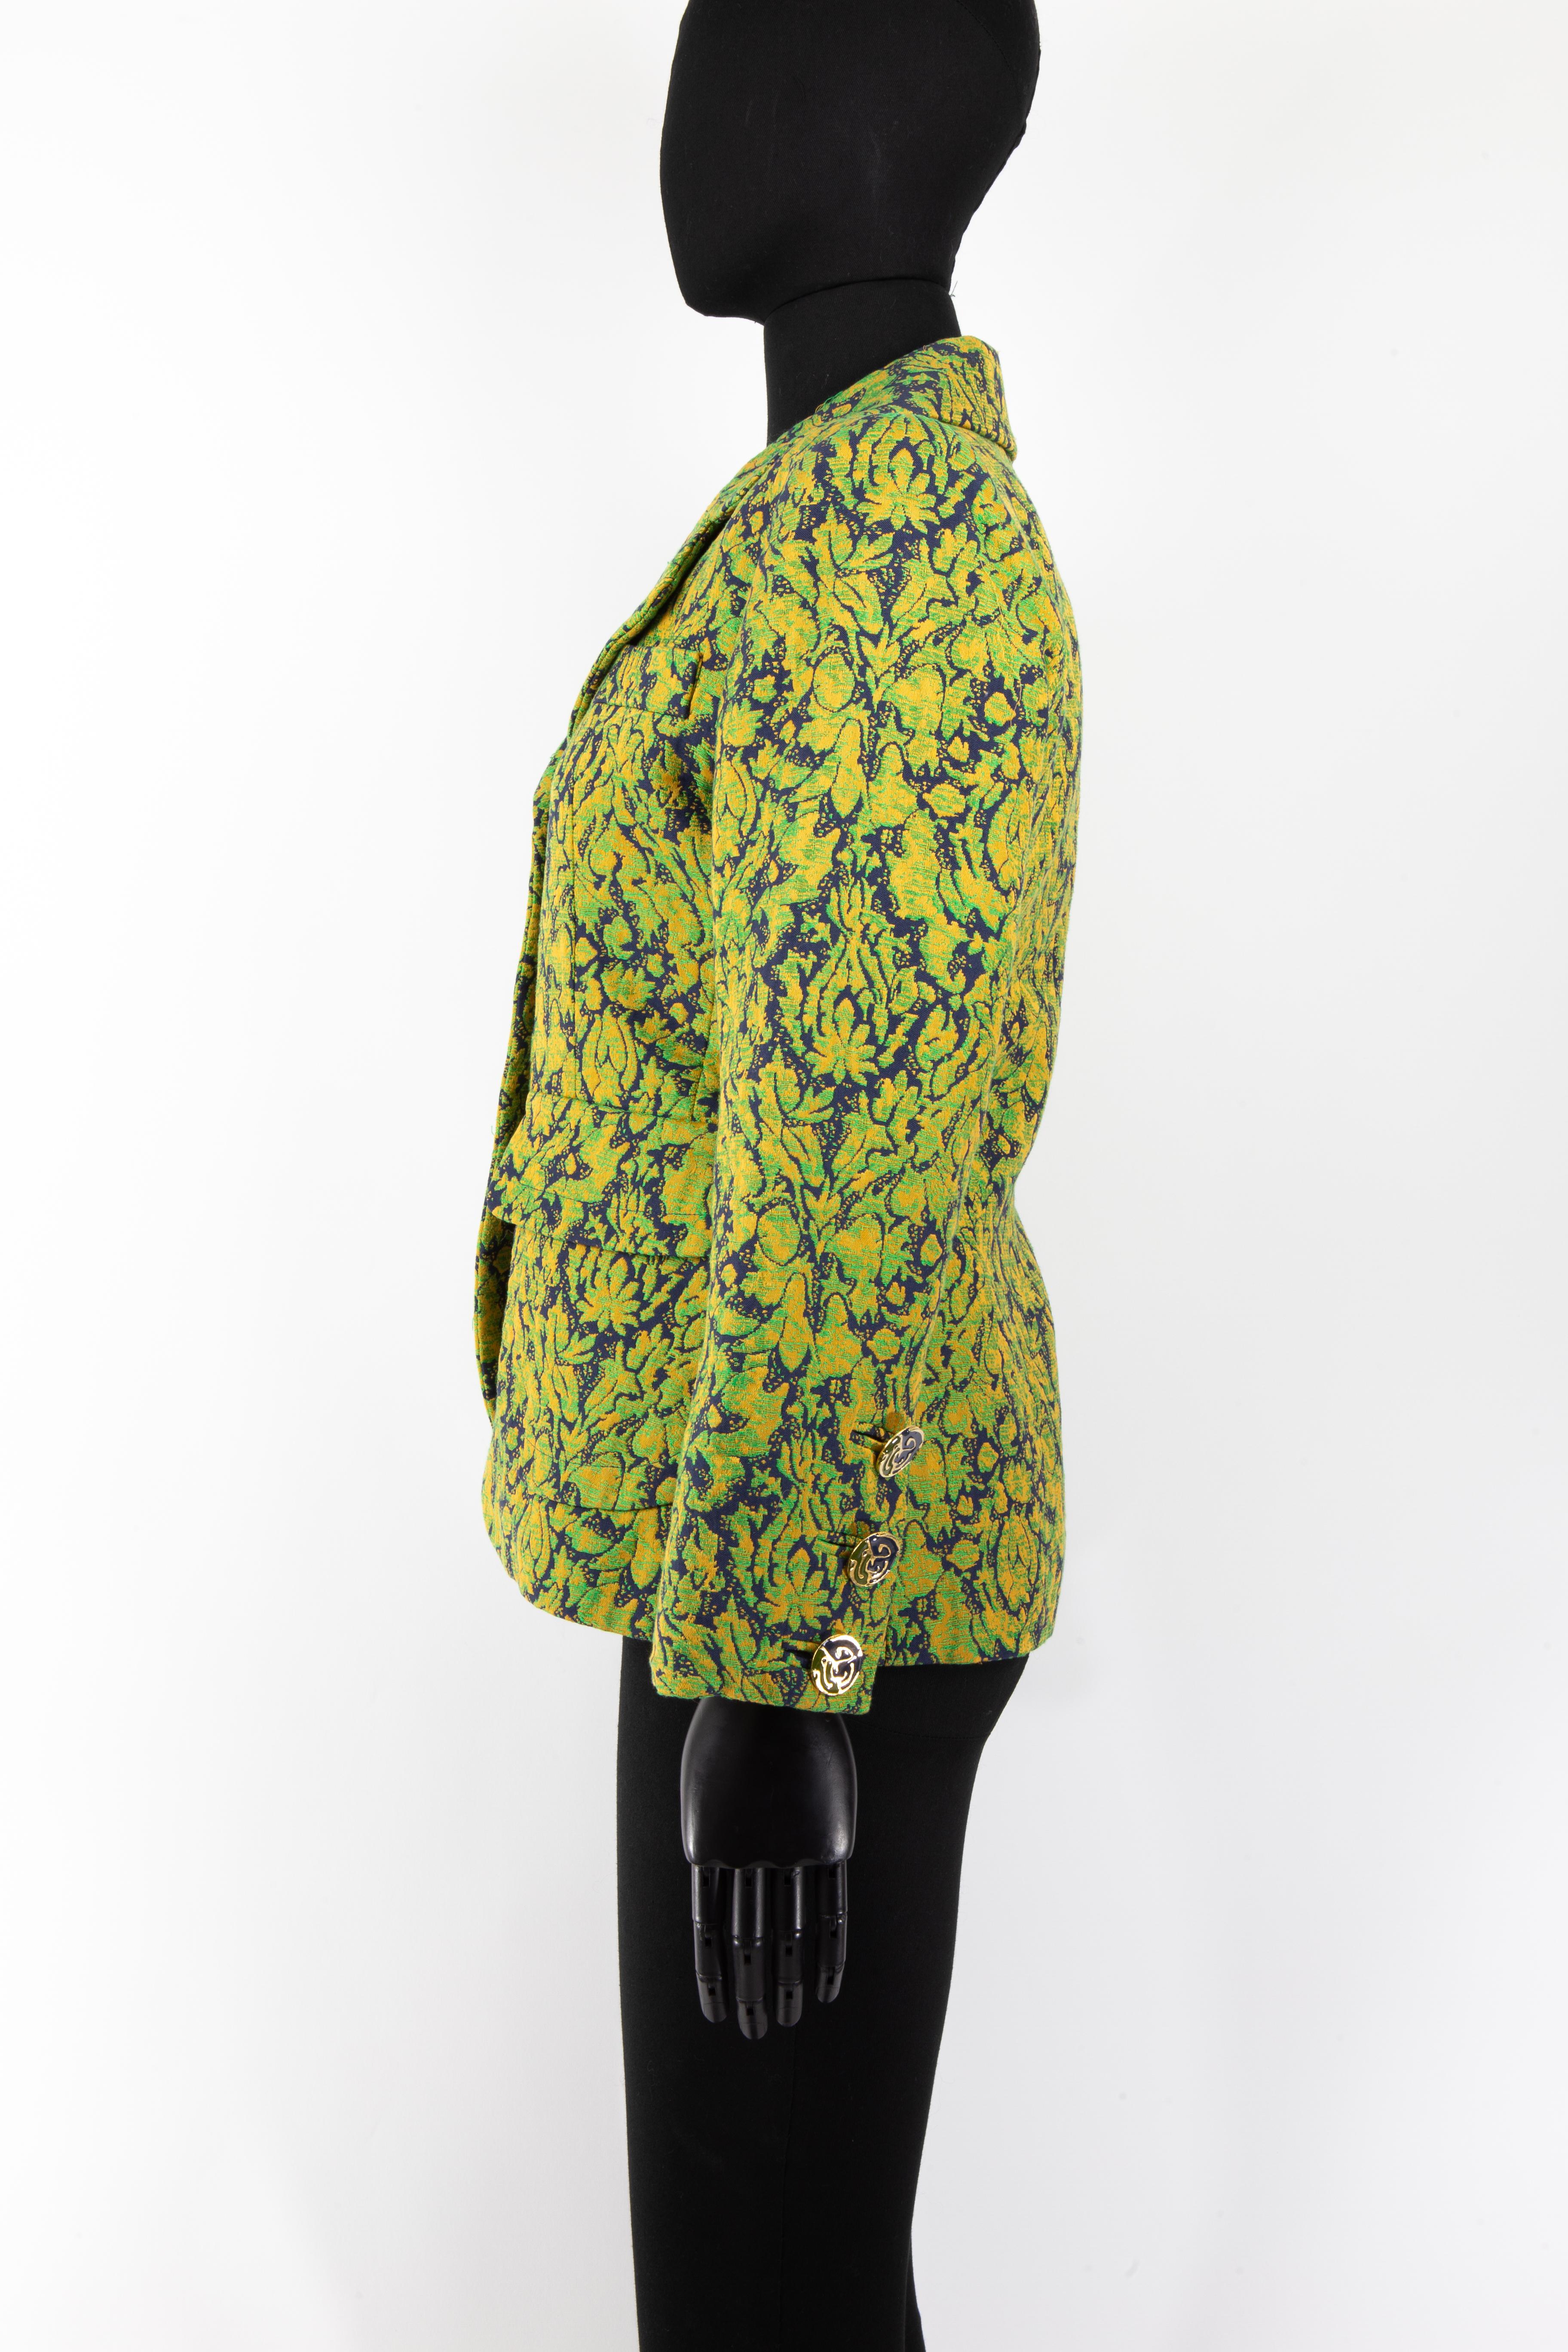 A 1992 Yves Saint Laurent navy, green and gold pattern jacket in a floral baroque taking an abstract theme. The front of the jacket is adorned with four enamelled buttons matching the theme of the pattern covering the jacket. These enamelled buttons